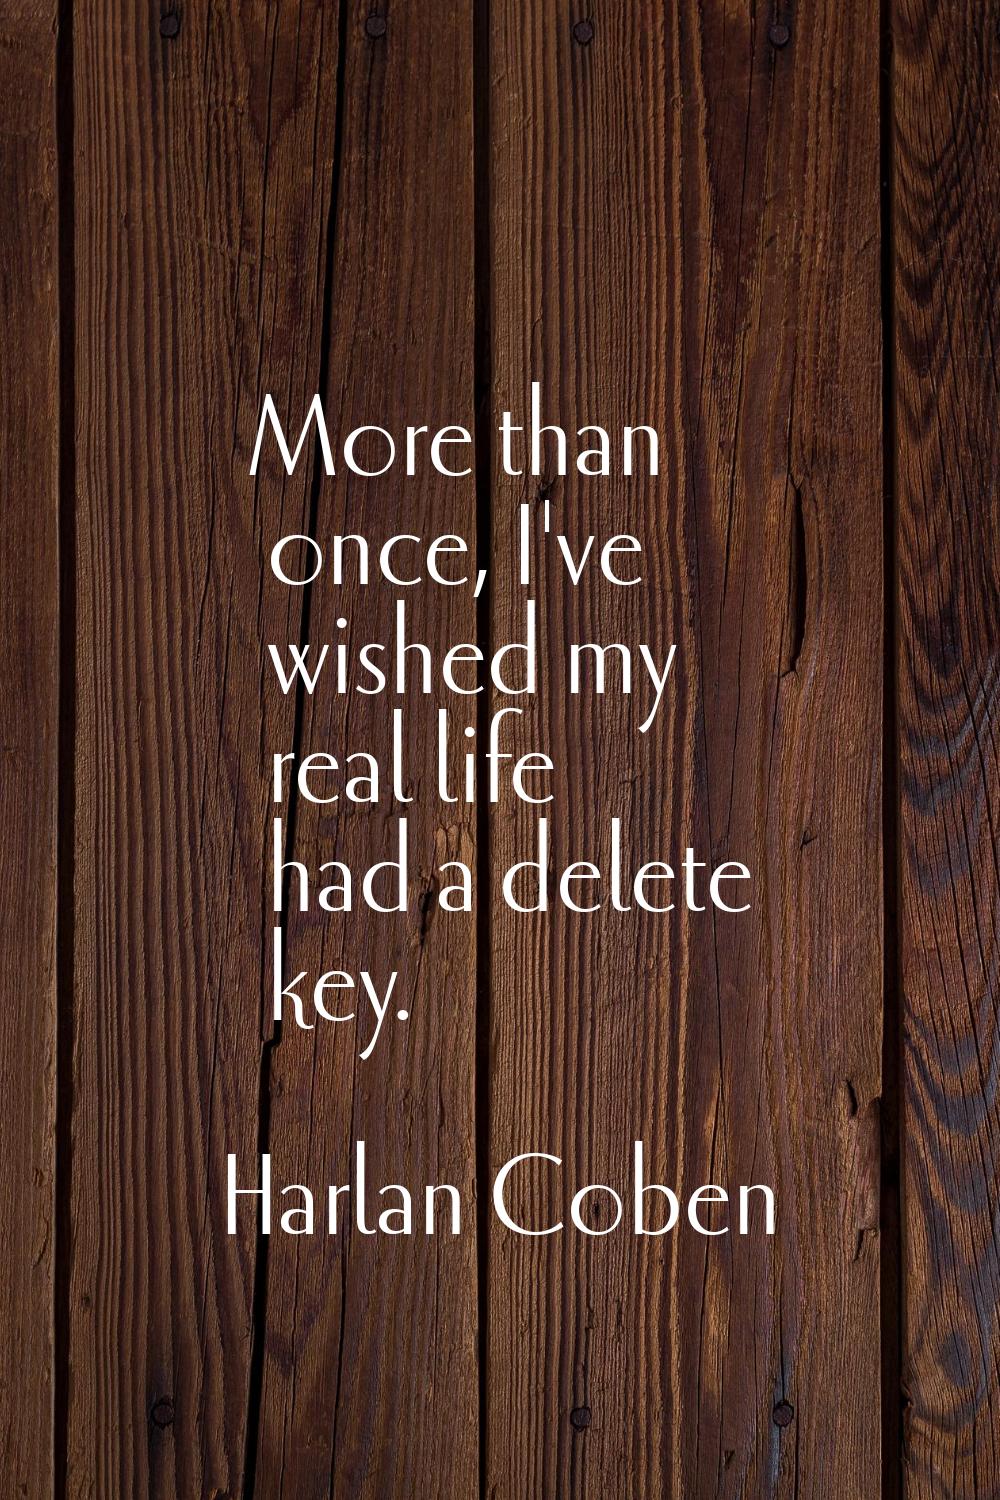 More than once, I've wished my real life had a delete key.